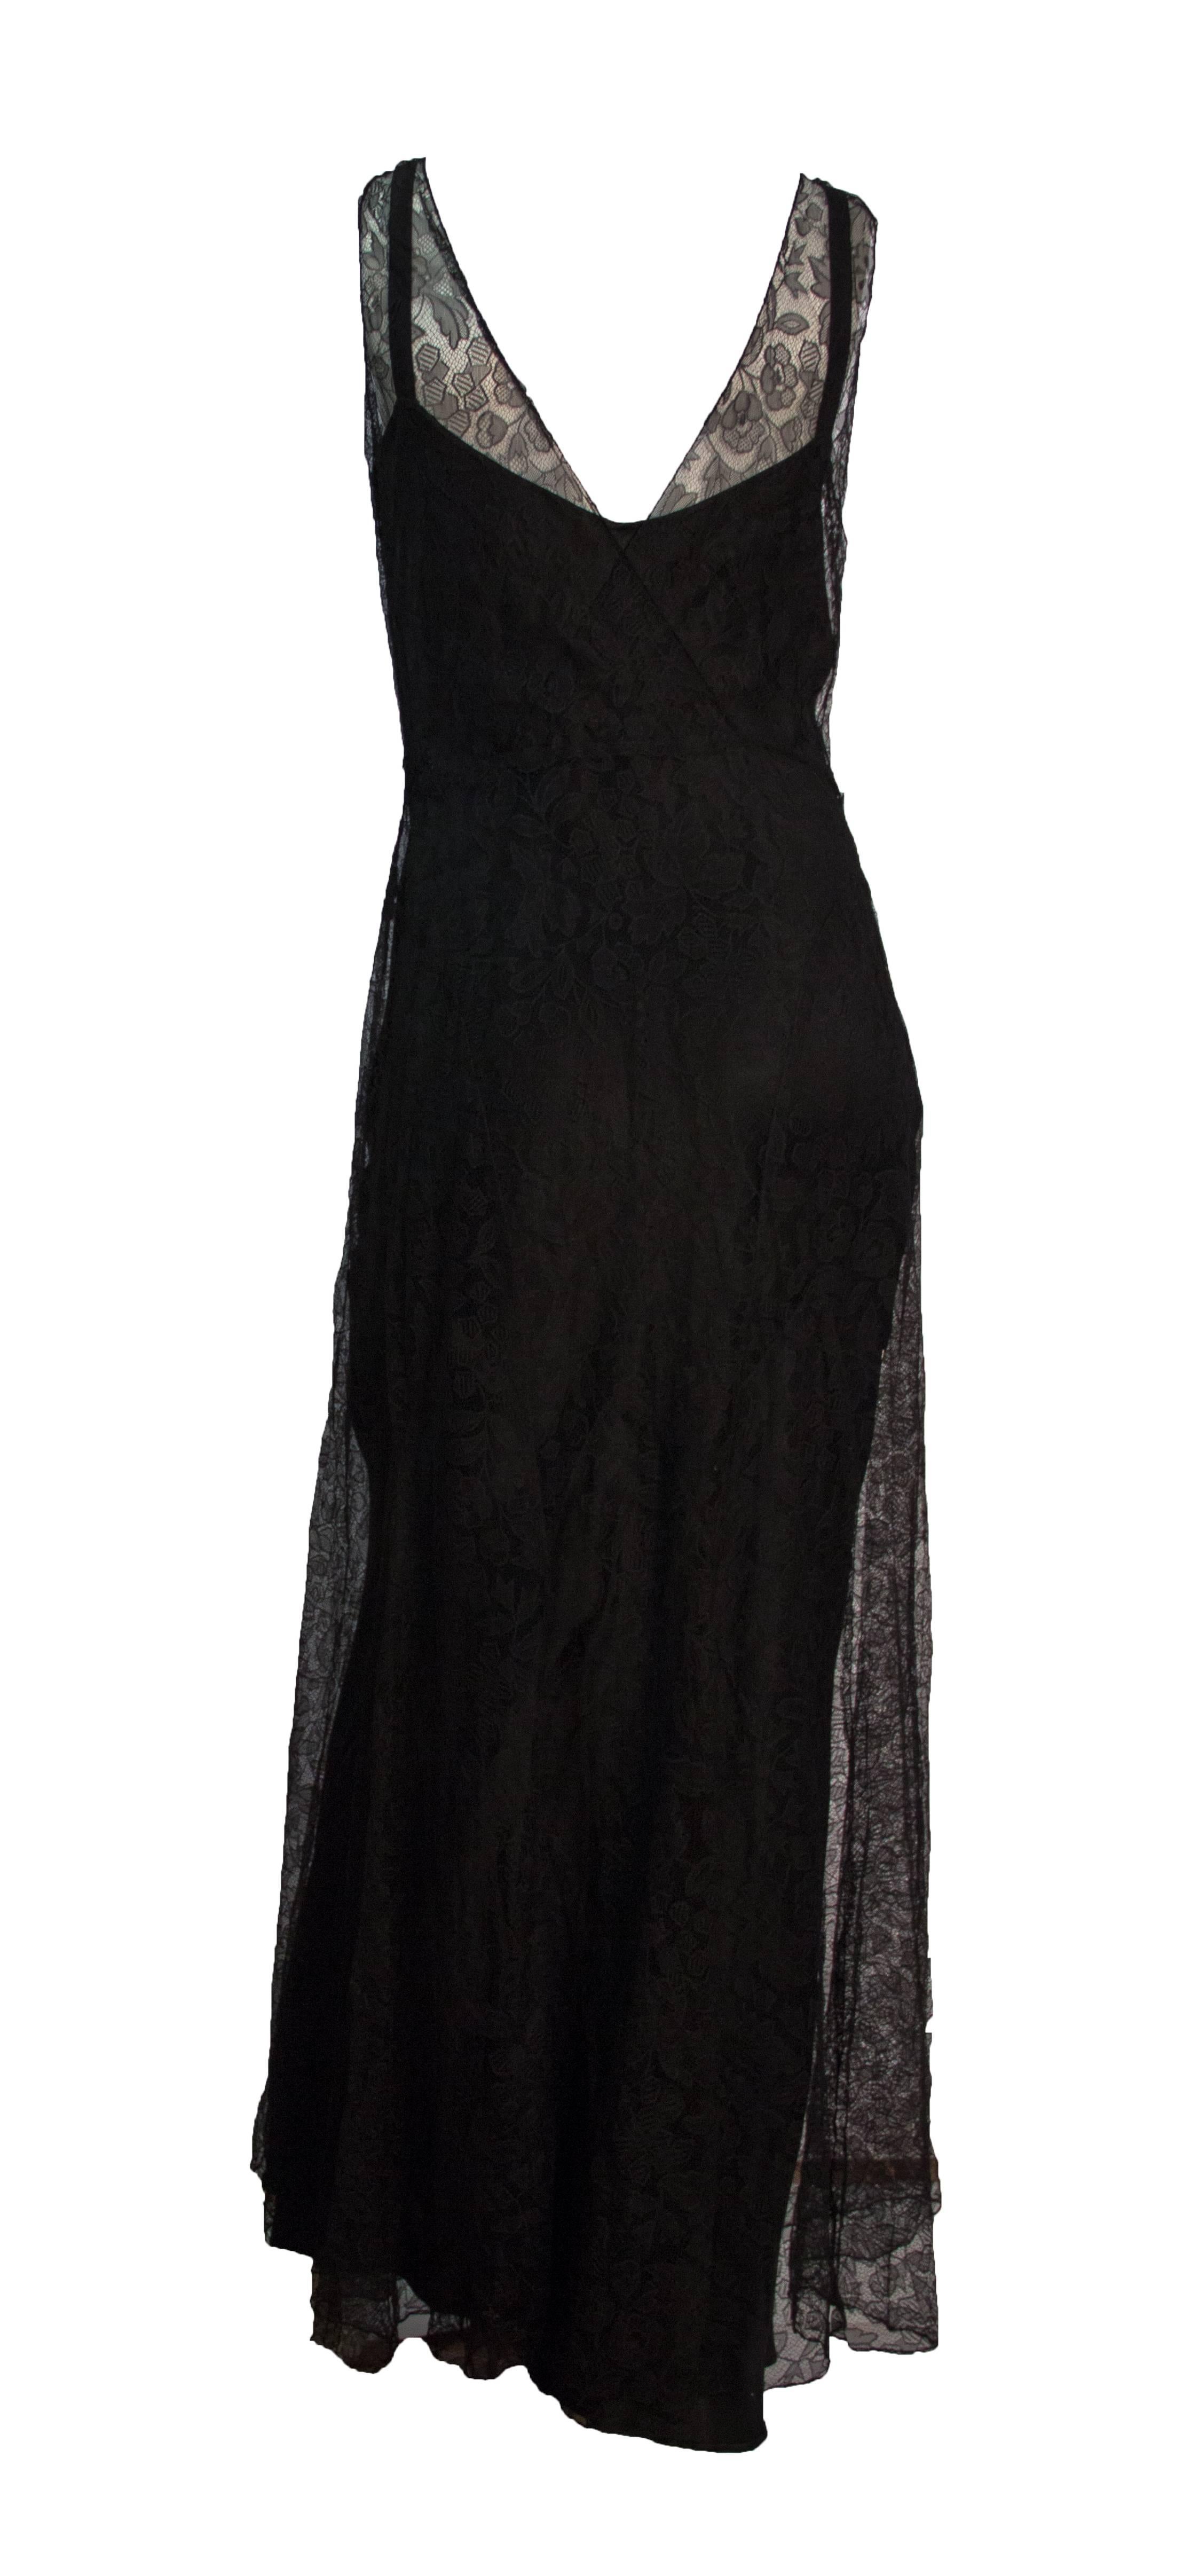 30s black lace evening gown with bias cut slip